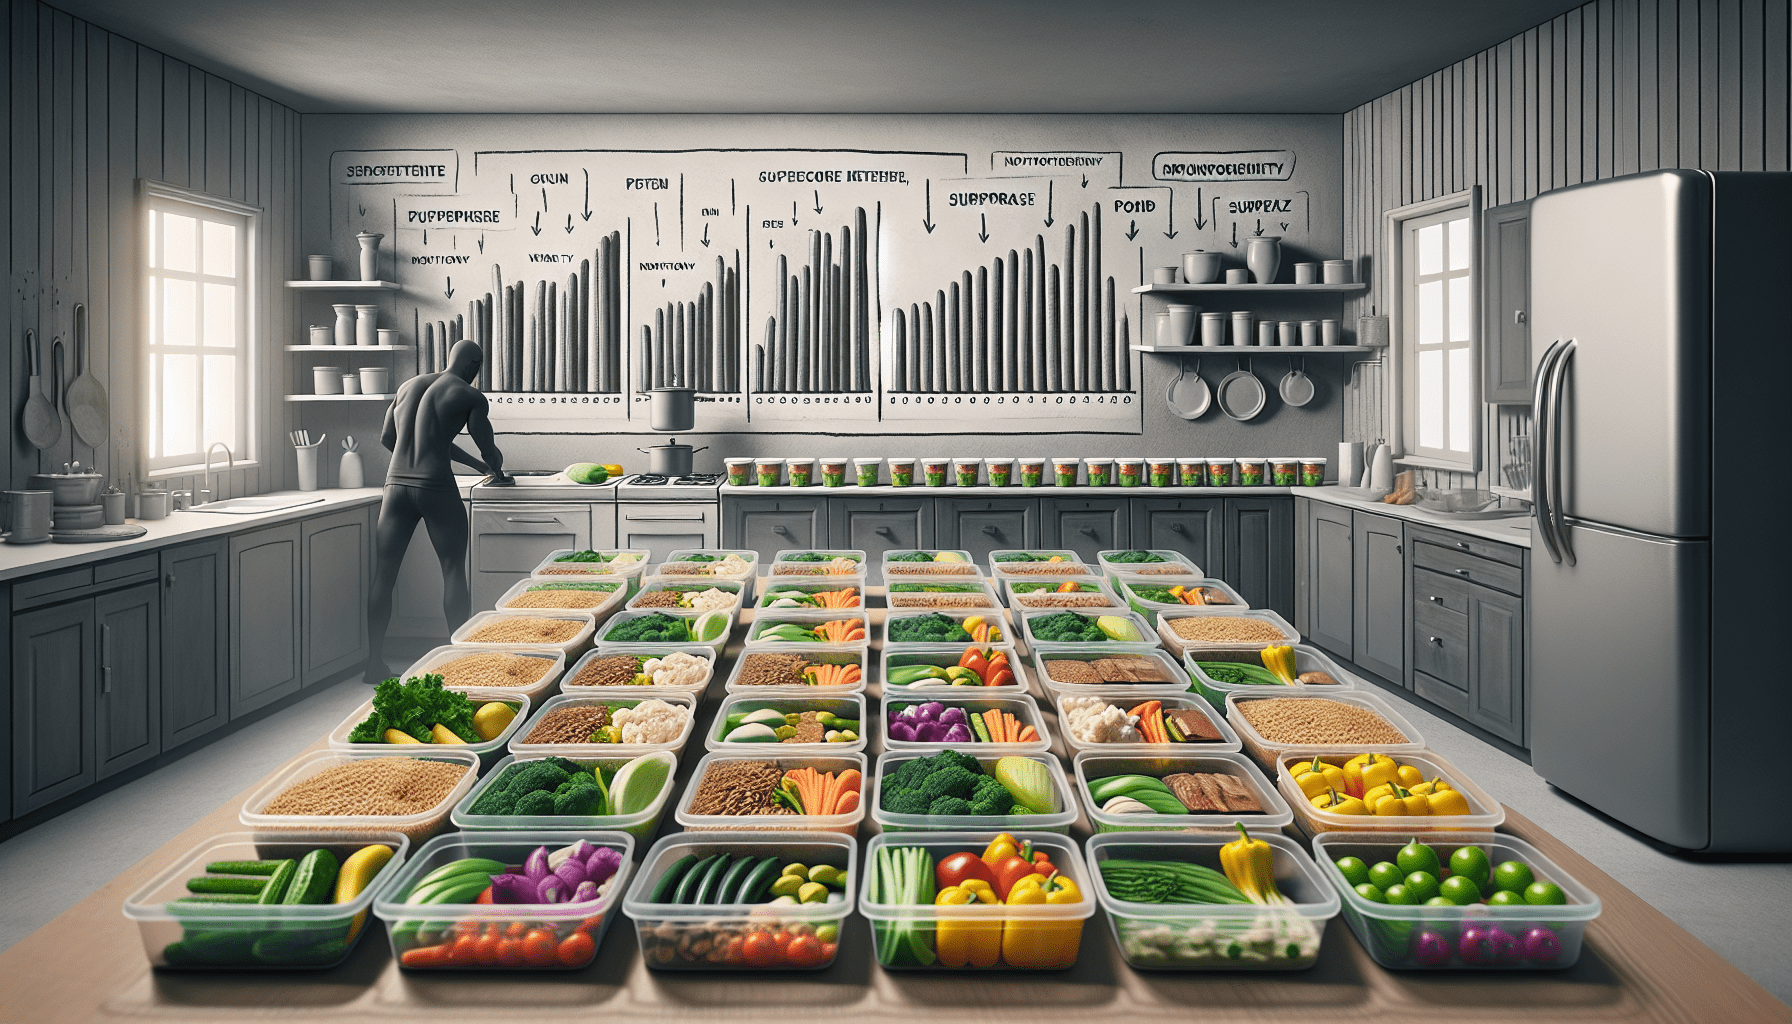 What Are The Disadvantages Of Meal Prep?